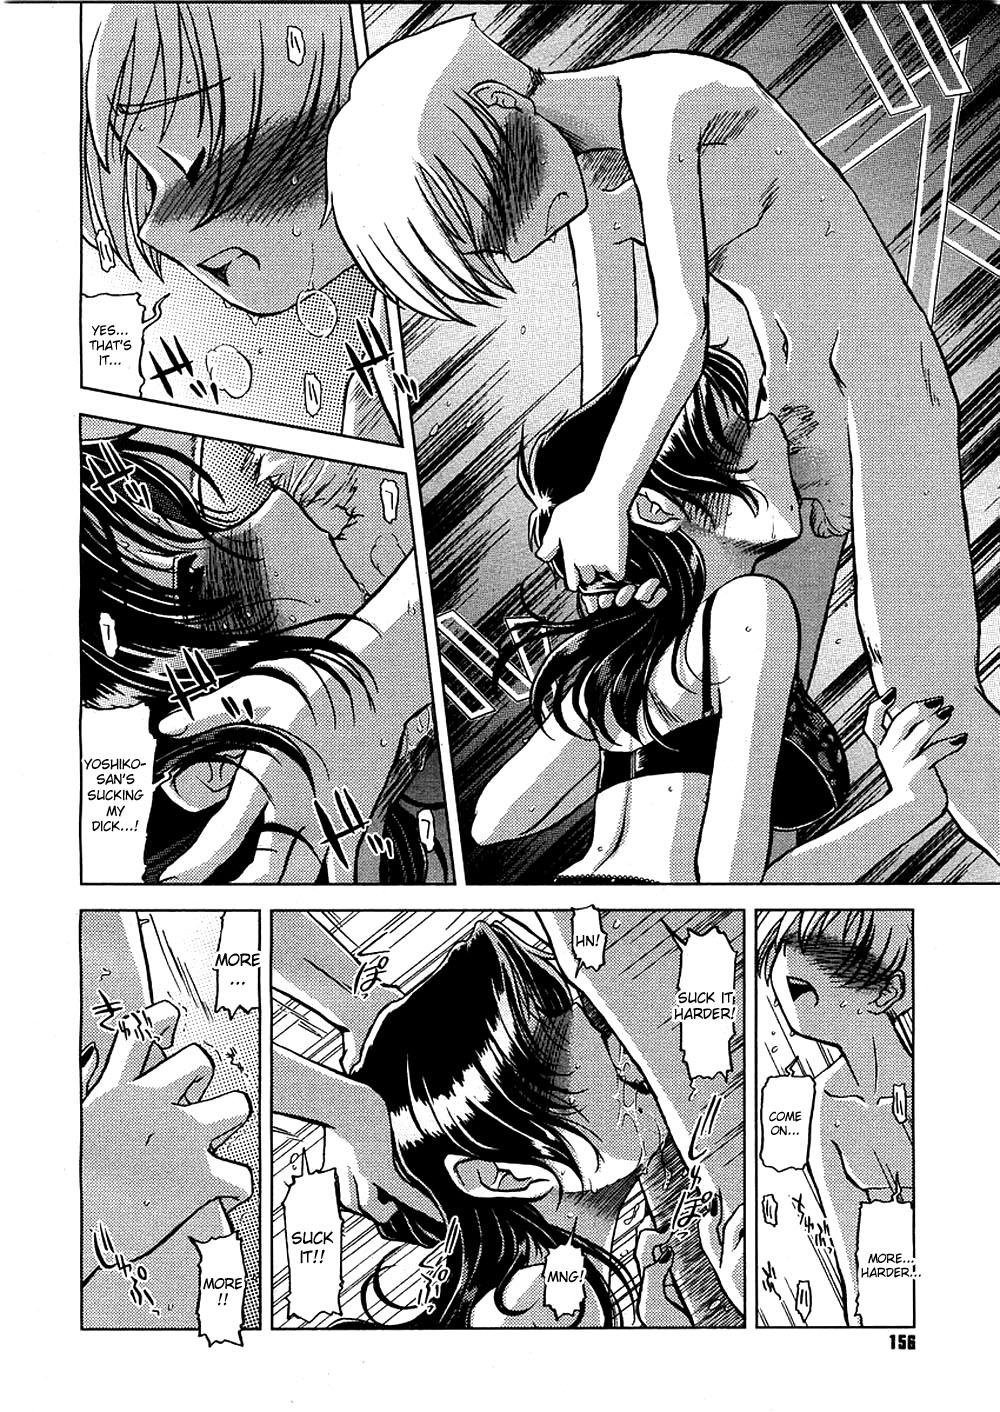 Dicks Oyako janai | We’re not mother and son Movies - Page 6